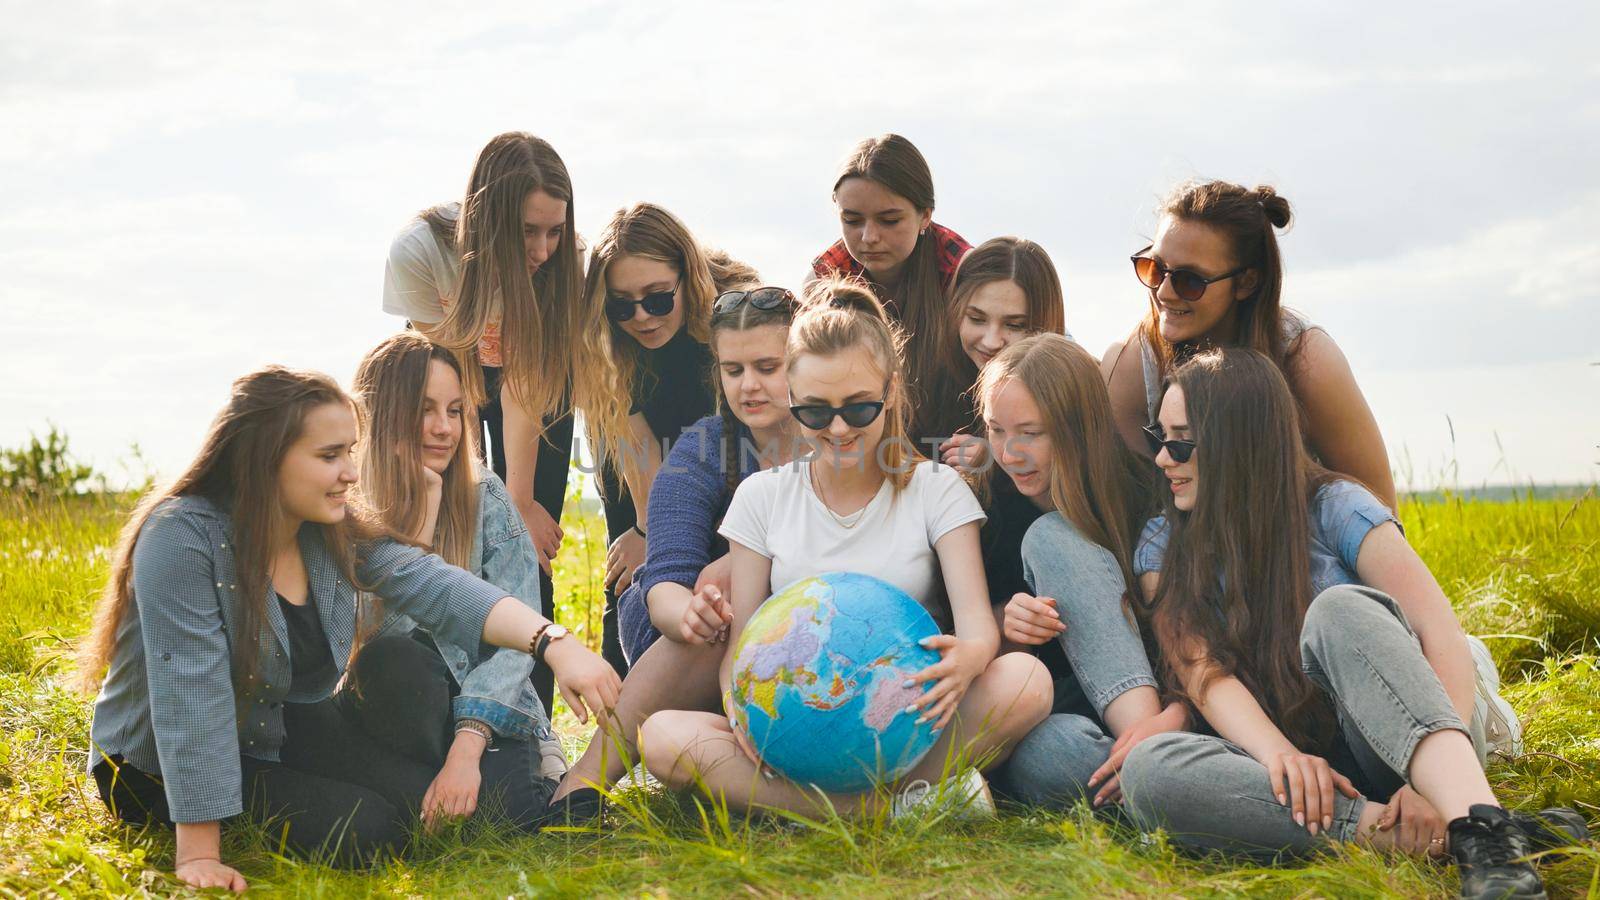 A group of cheerful girls is exploring the globe of the world in the meadow